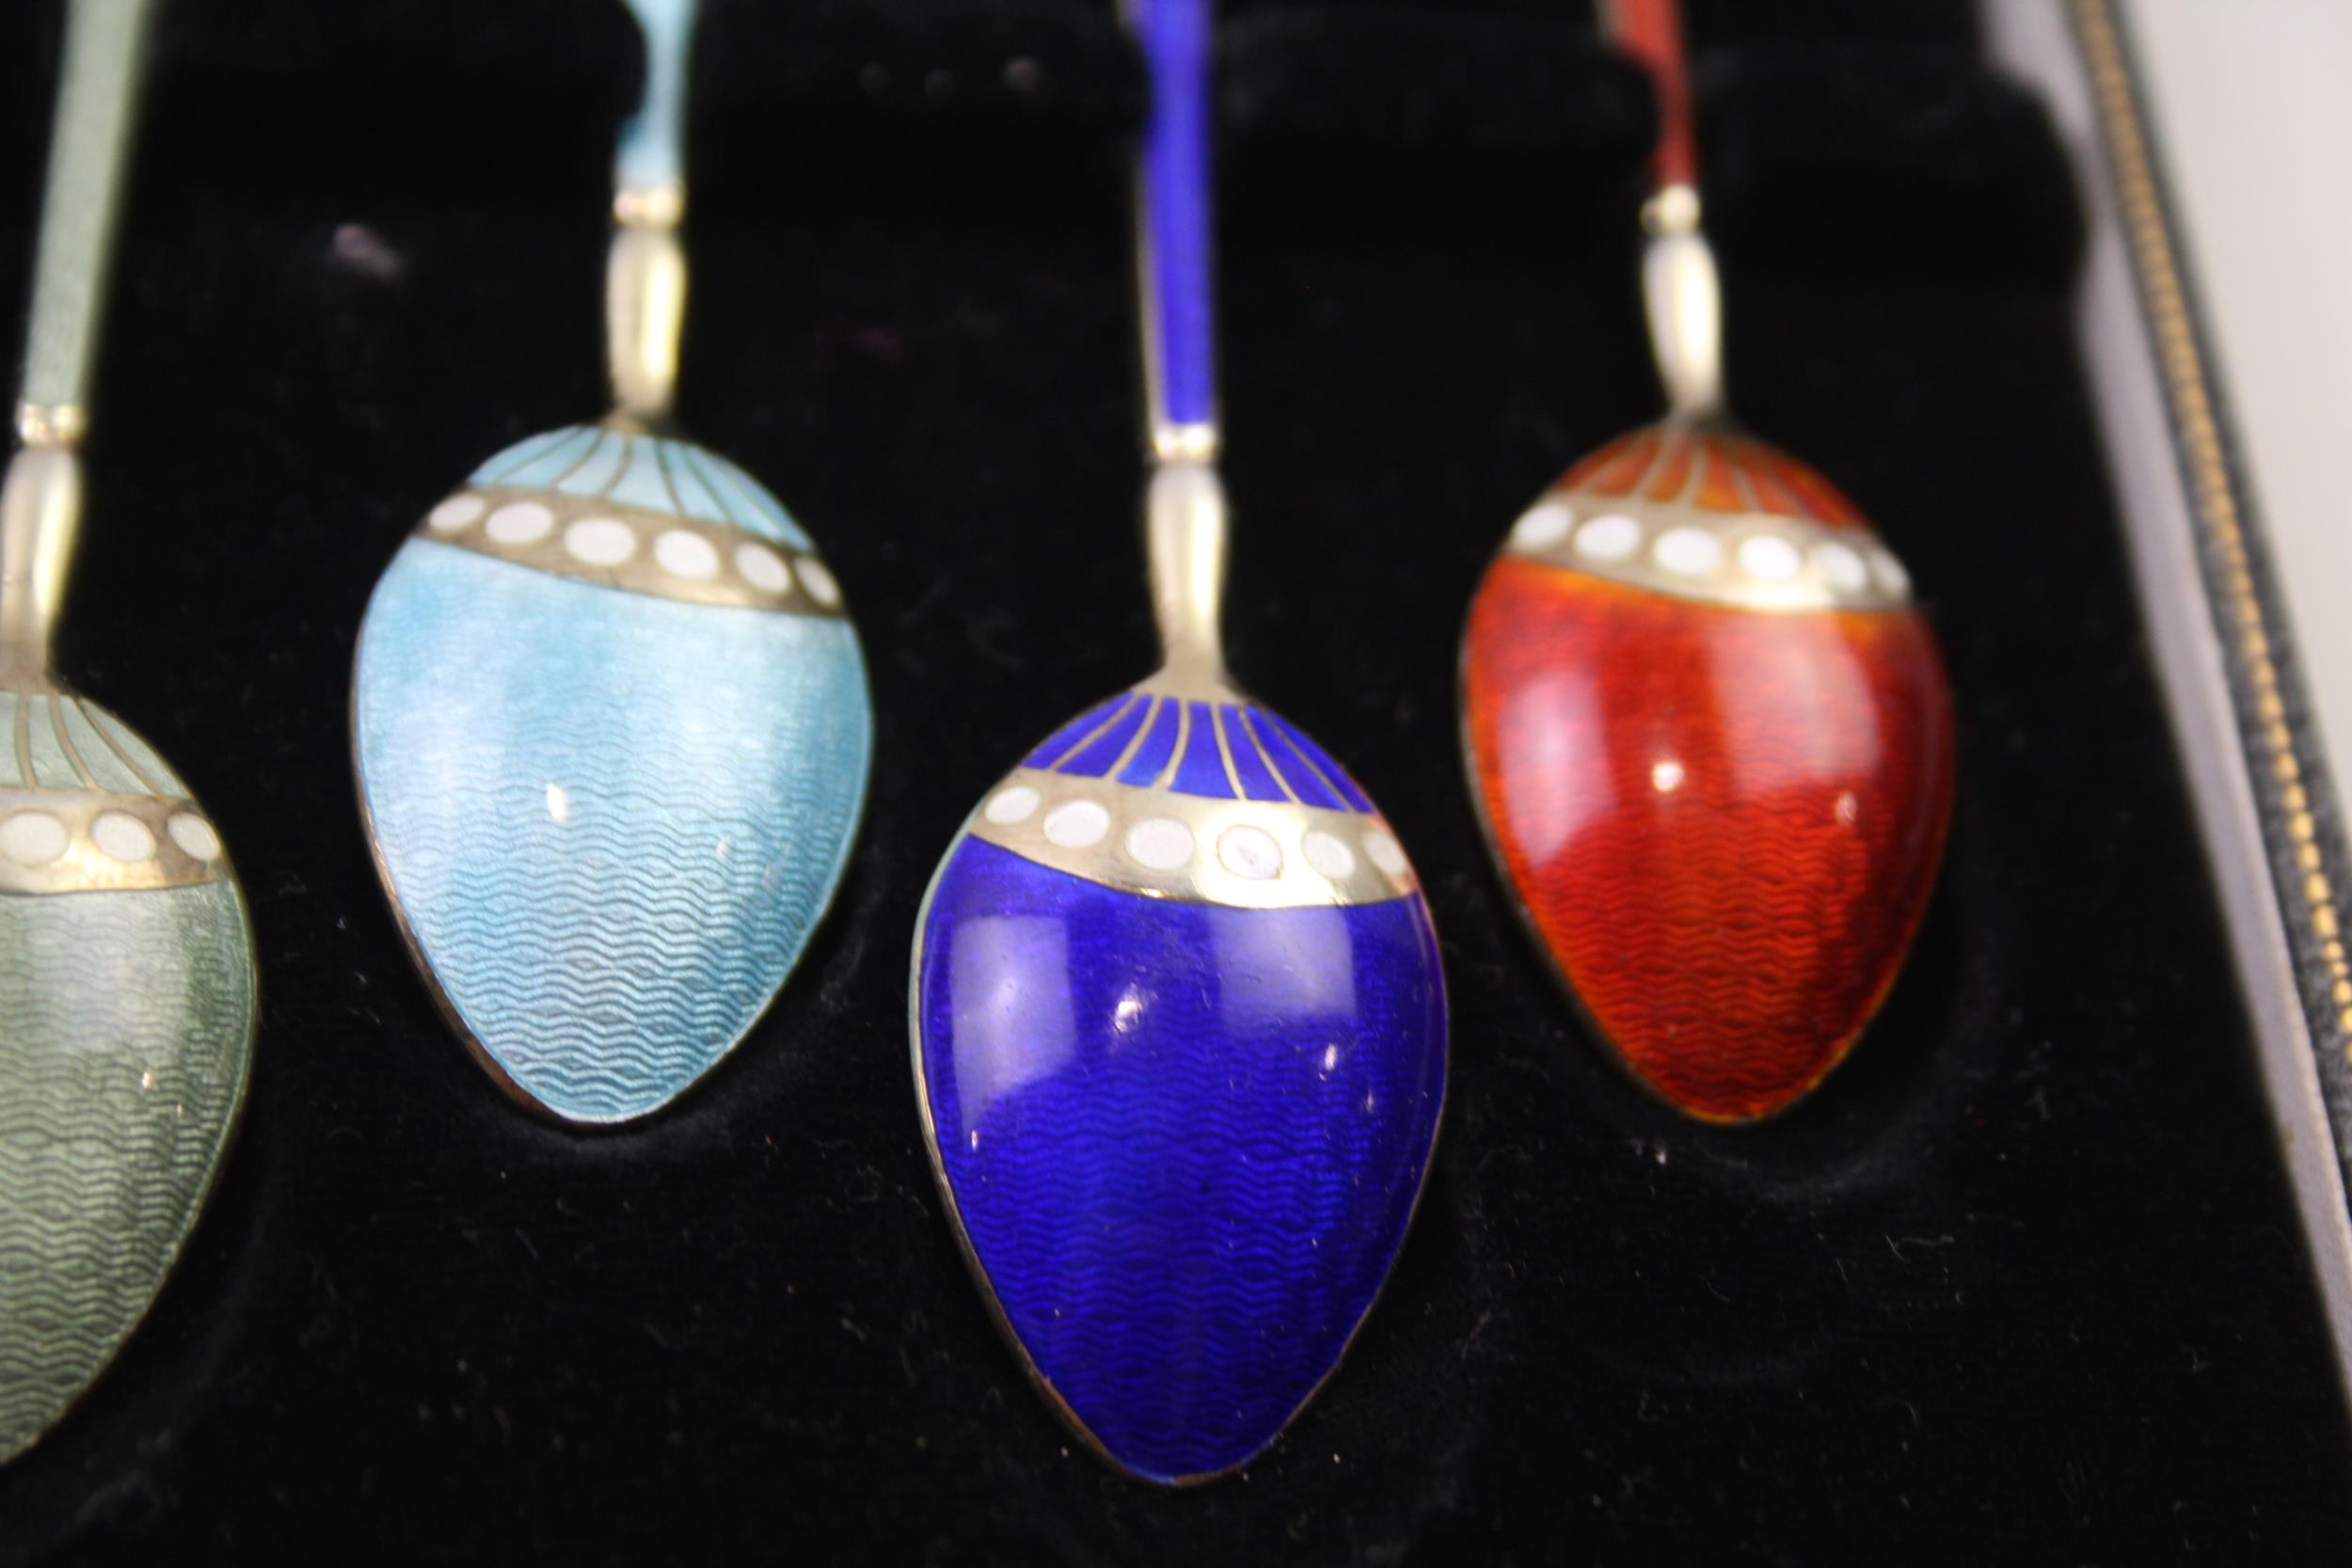 6 x Vintage 1956 Birmingham Sterling Silver Guilloche Enamel Spoons (69g) // w/ Fitted Case - Image 4 of 5